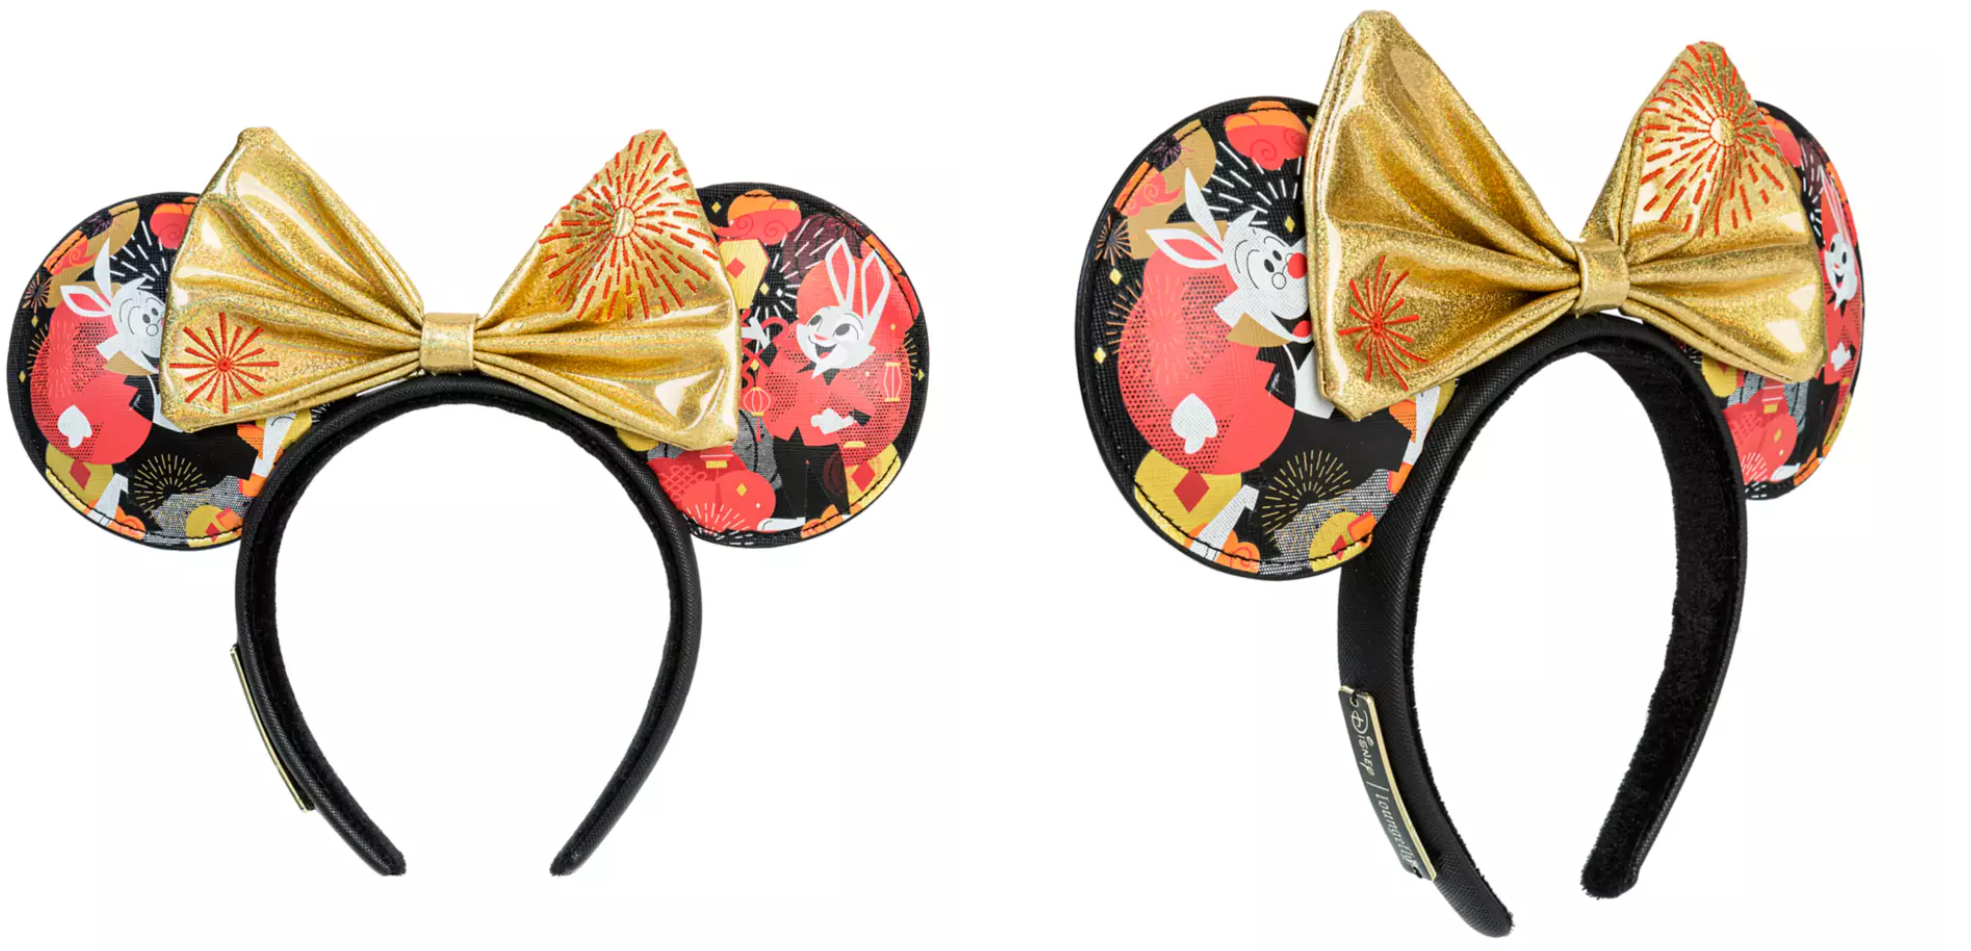 Lunar New Year Rabbit Merchandise Now Available On Shop Disney